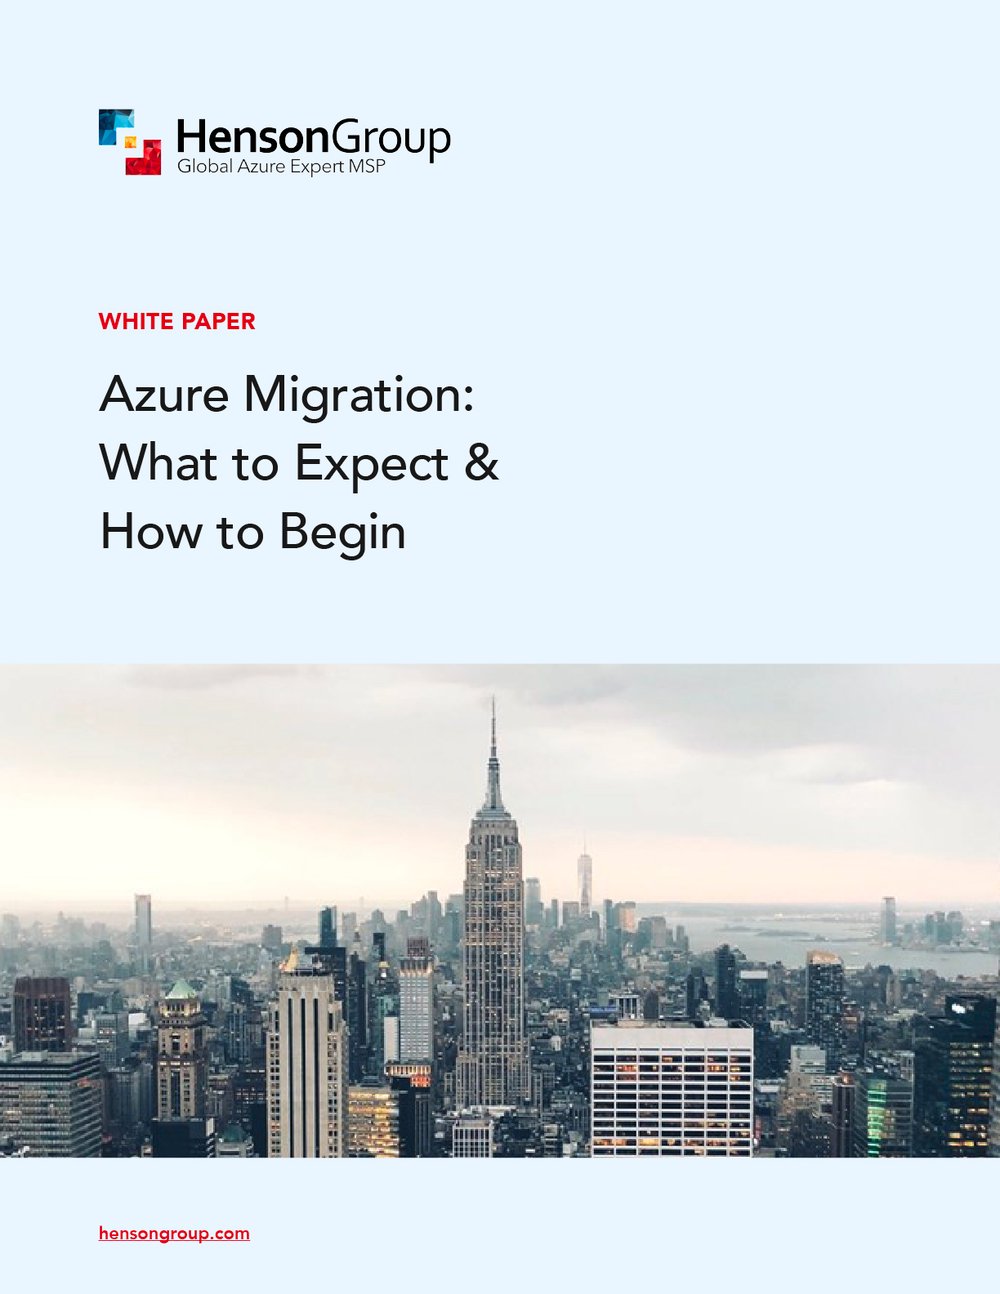 Henson-Group-White-Paper-Azure-Migration-What-to-Expect-and-How-to-Begin-IMAGES-Cover